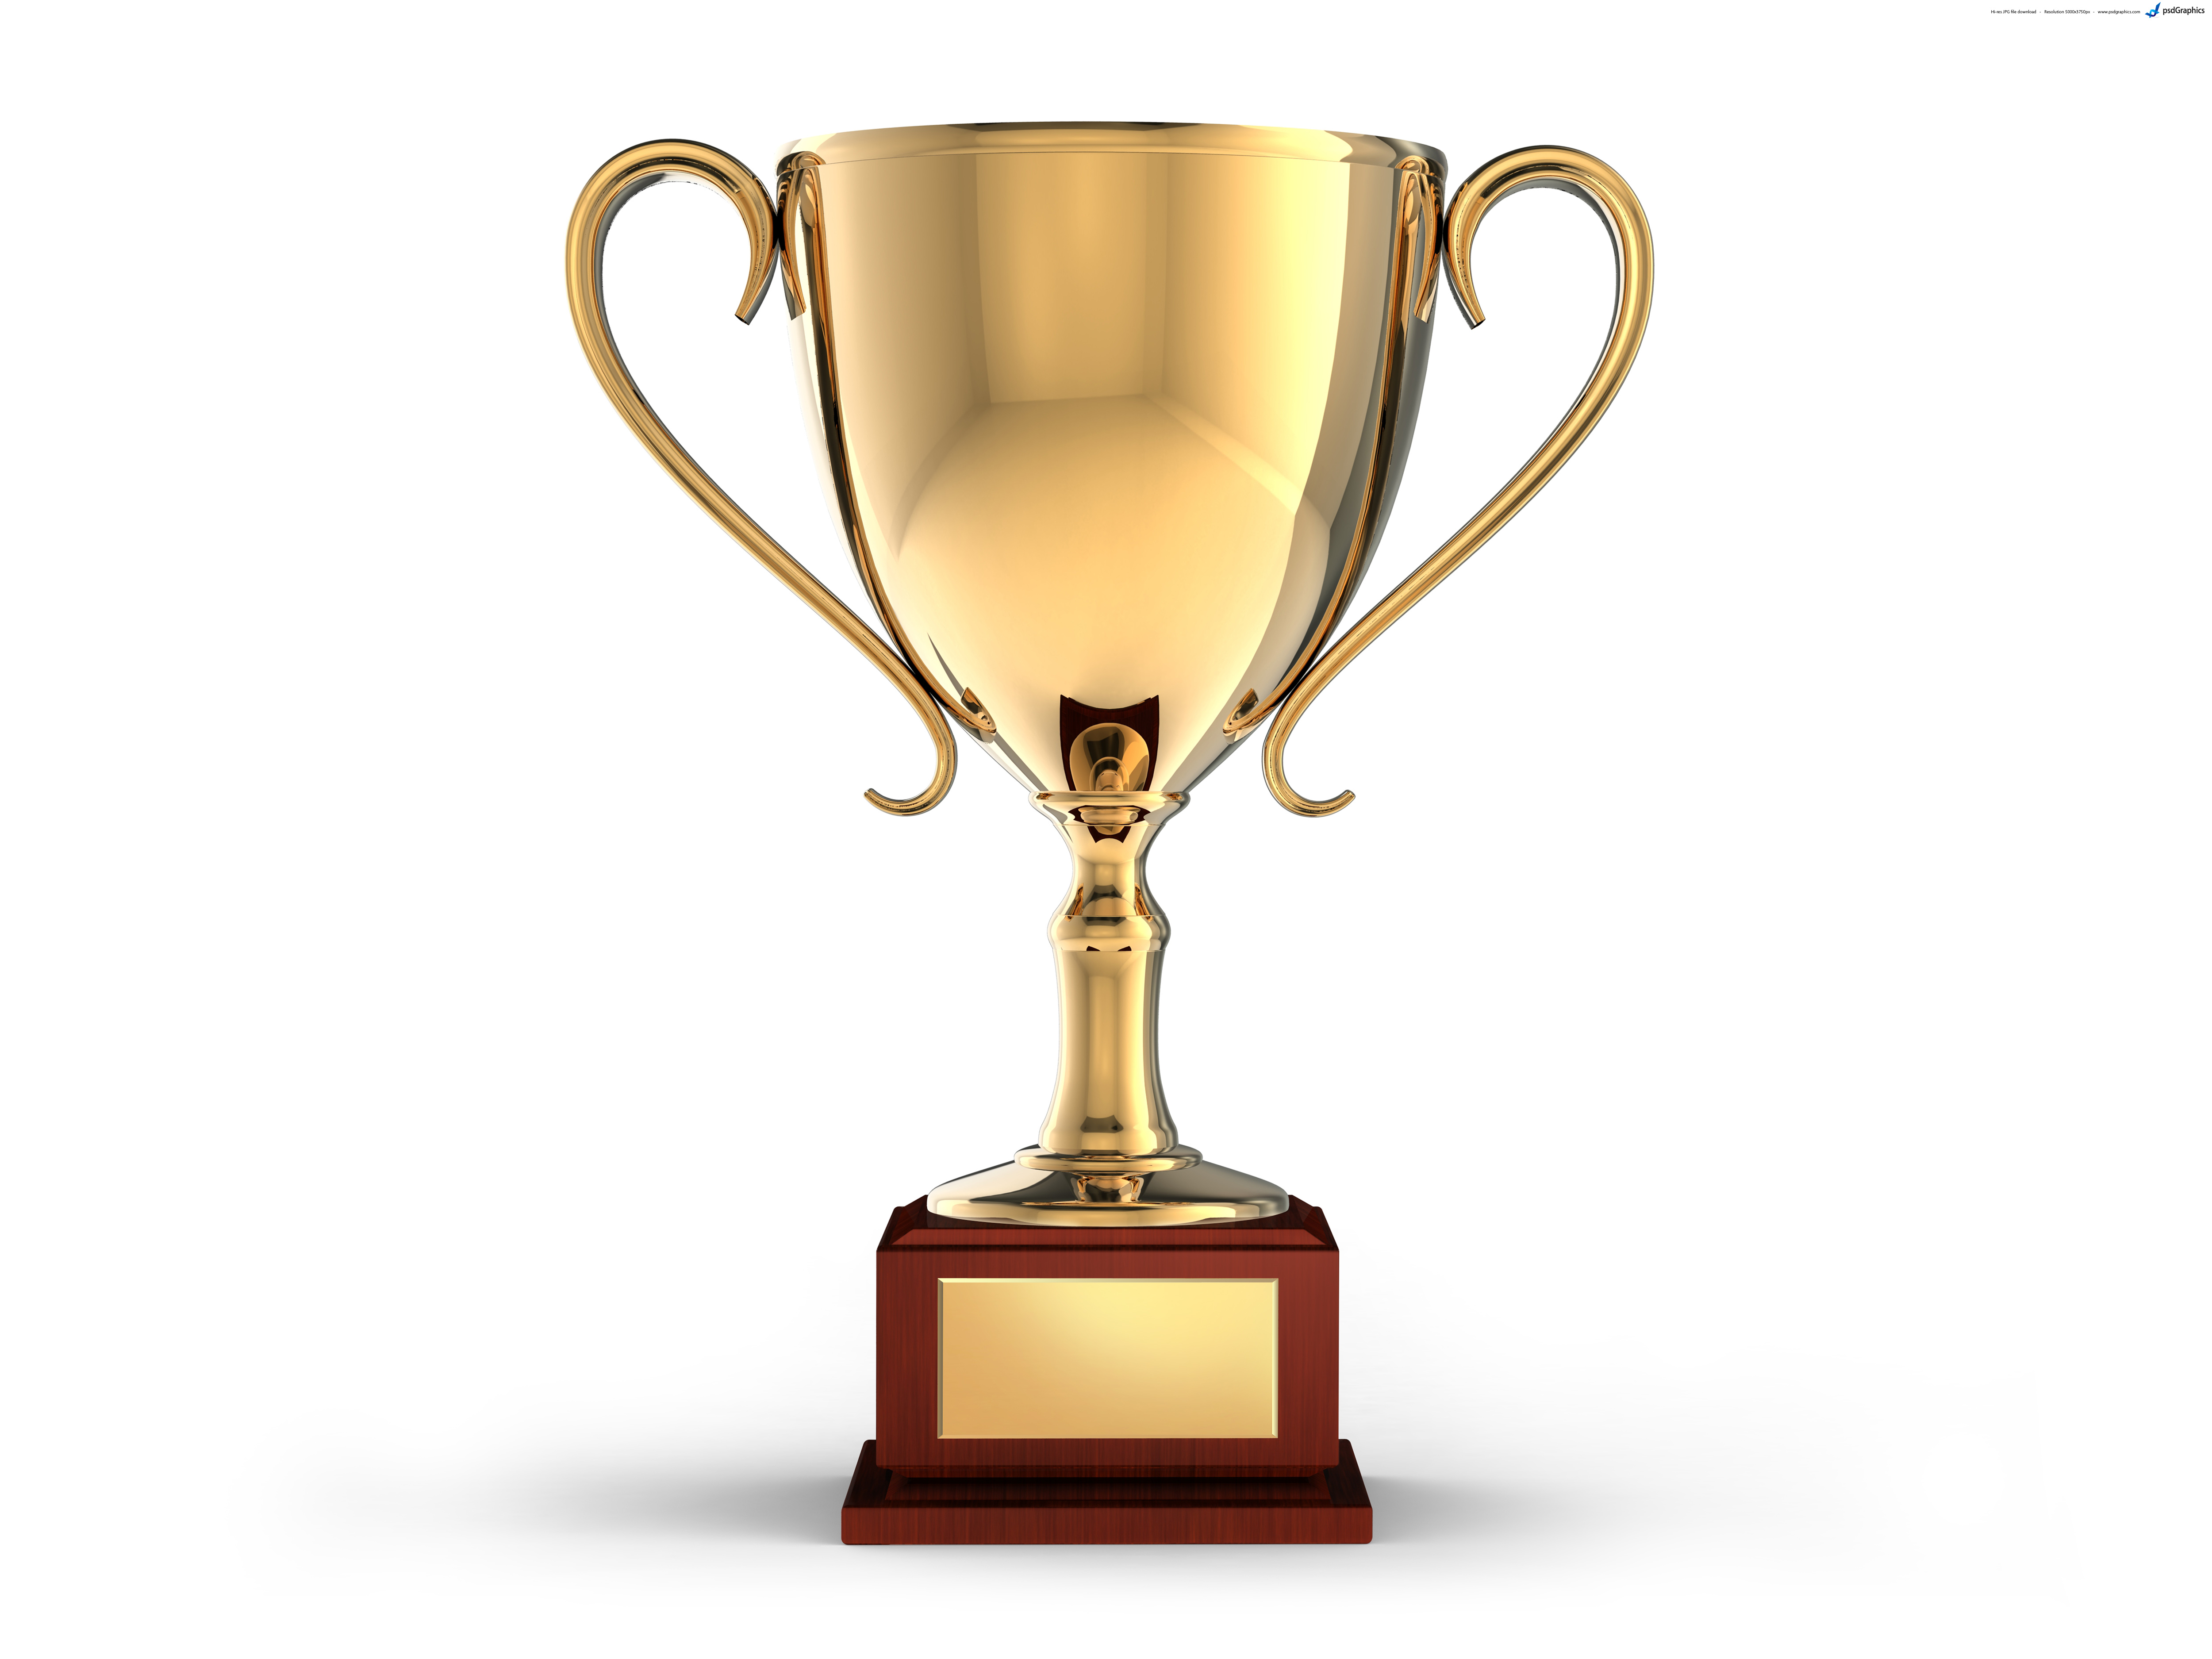 Free Trophy Cup, Download Free Clip Art, Free Clip Art on.